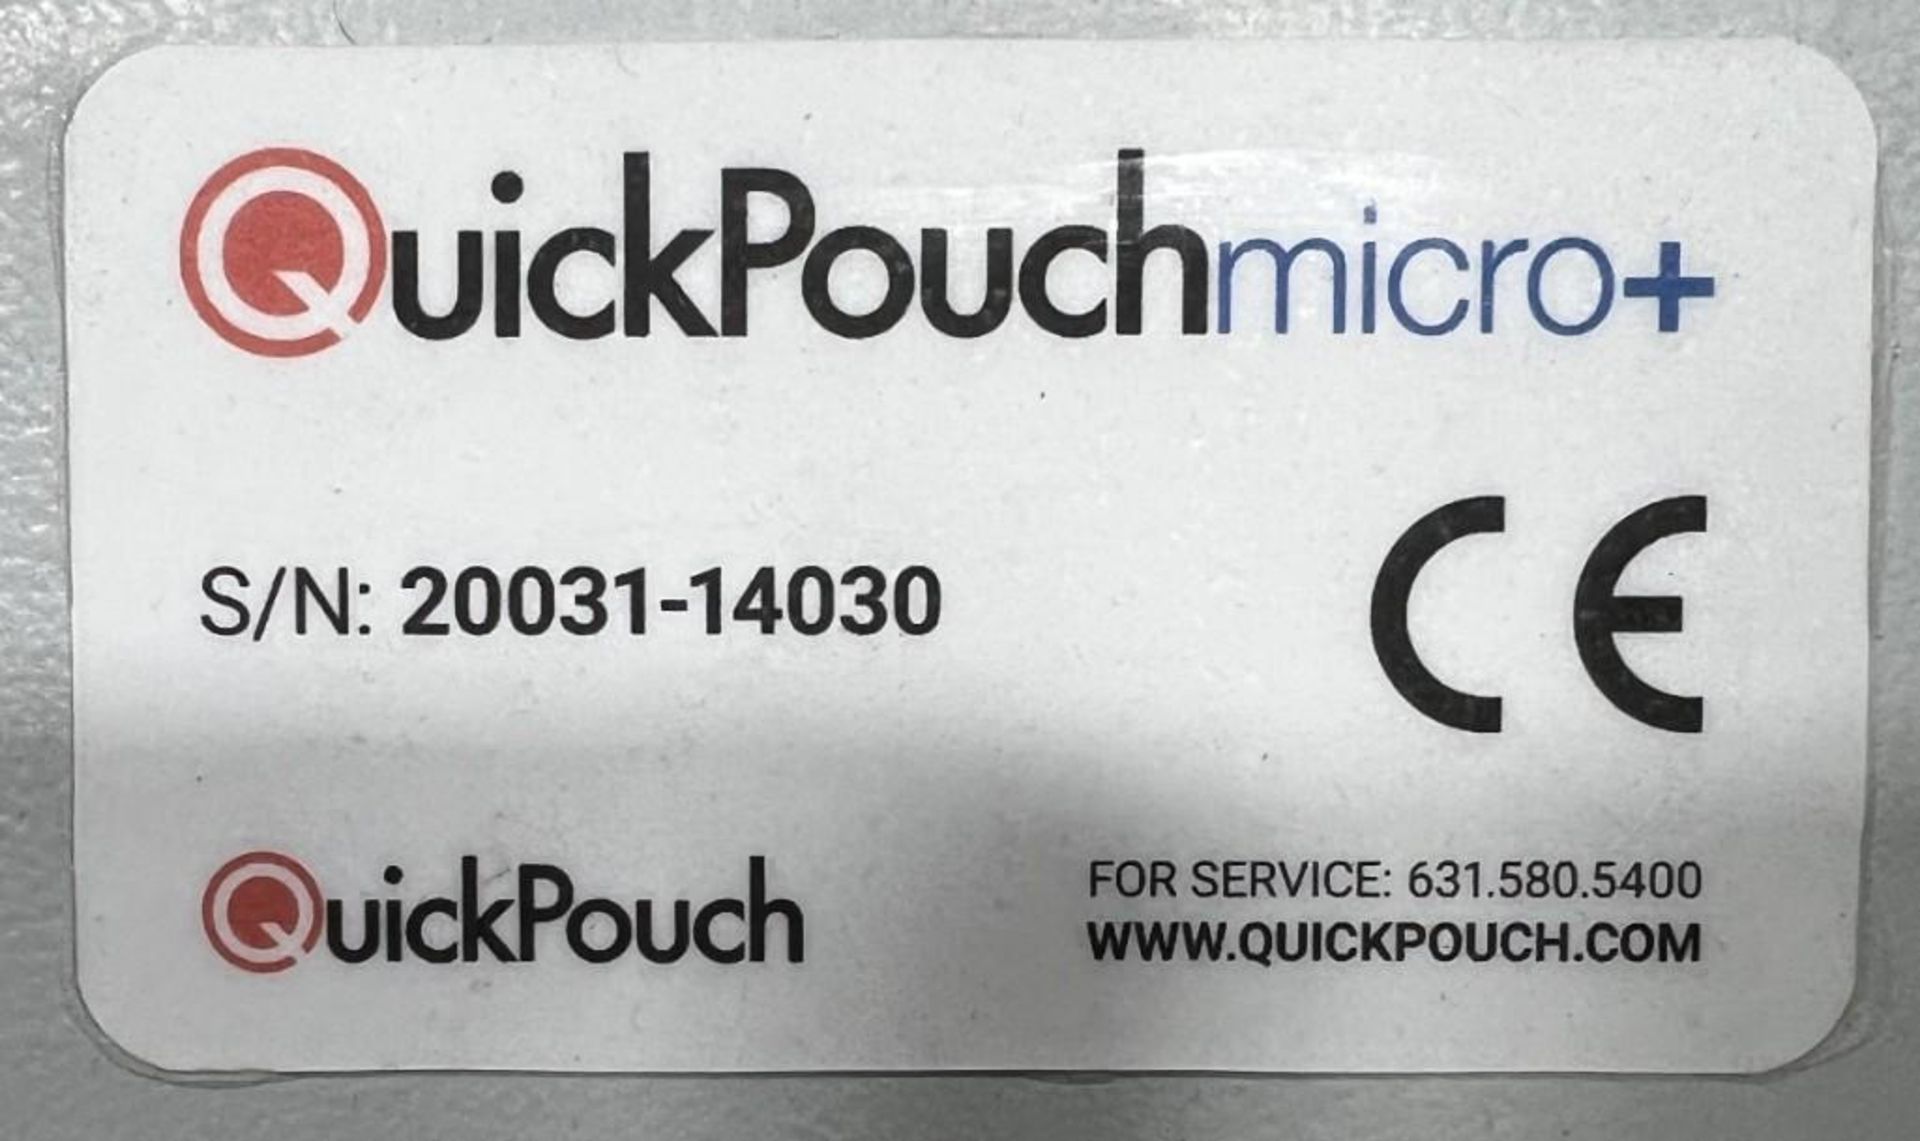 QuickPouch Micro+ Desktop Pouch Opener. Serial# 20031-14030. - Image 6 of 6